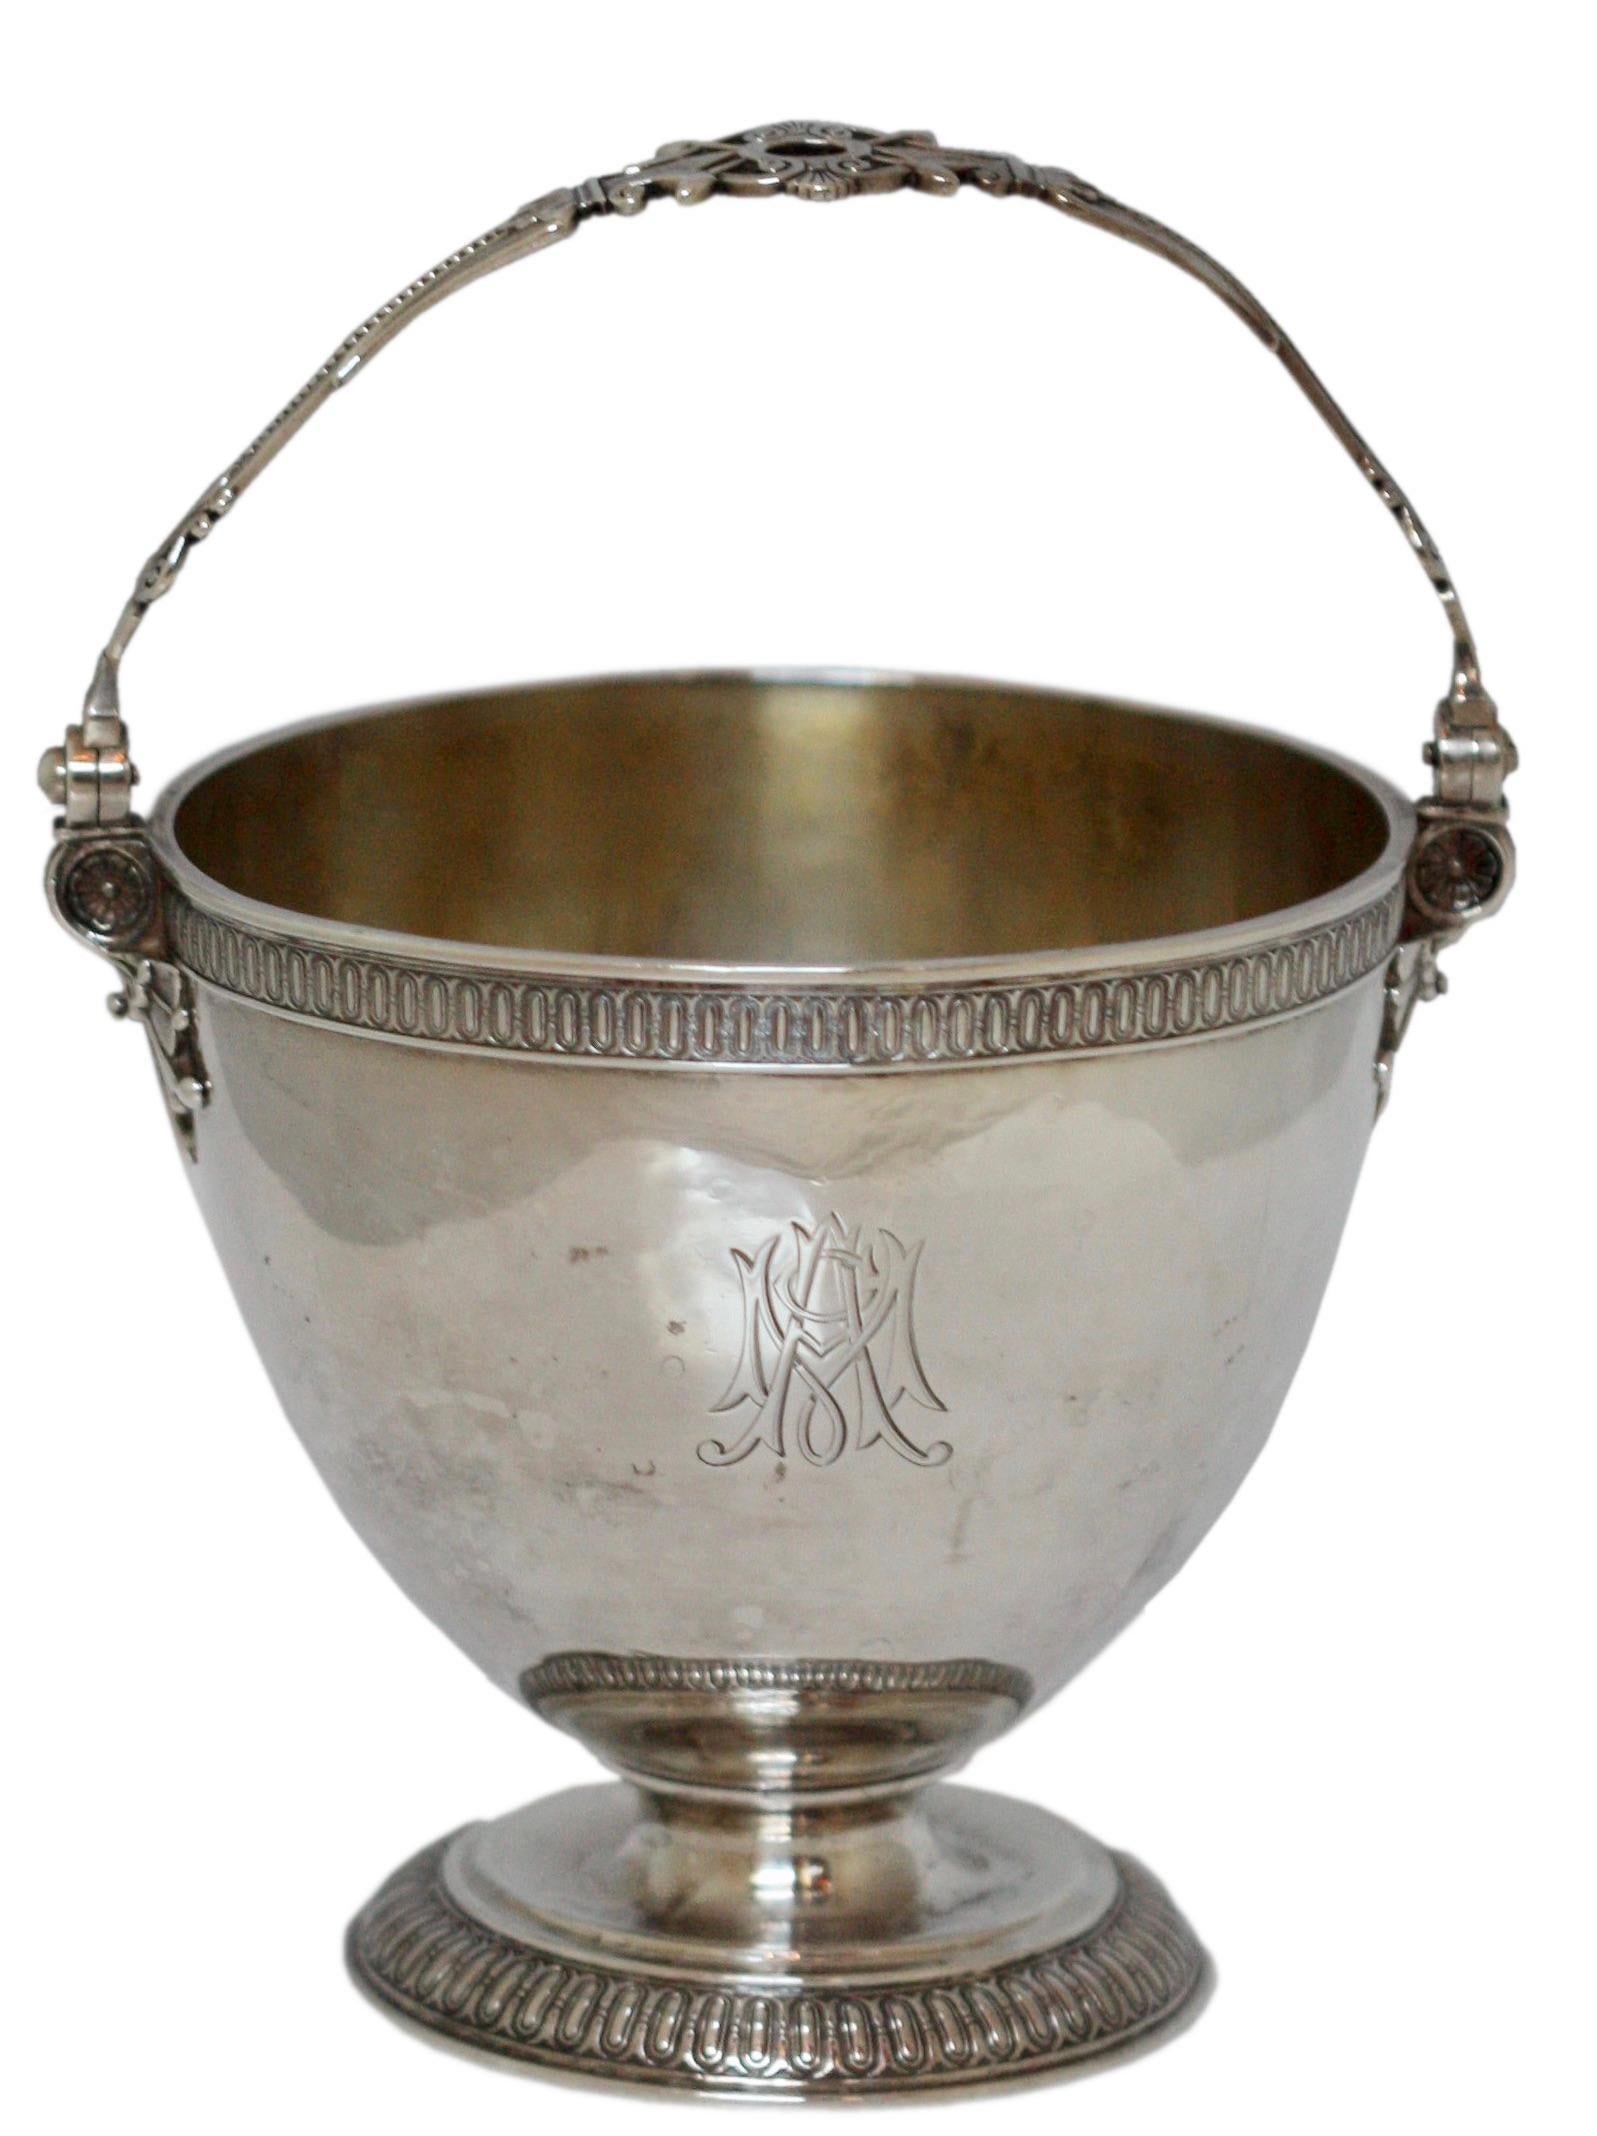 A rare Tiffany & Co. Sterling silver sugar bowl. 
American, 1870-1875.
Made for an International Exposition. 
Of basket shape with swing handle, engraved with a conjoined monogram with guilloche borders on a circular foot.
Diameter 4 1/2